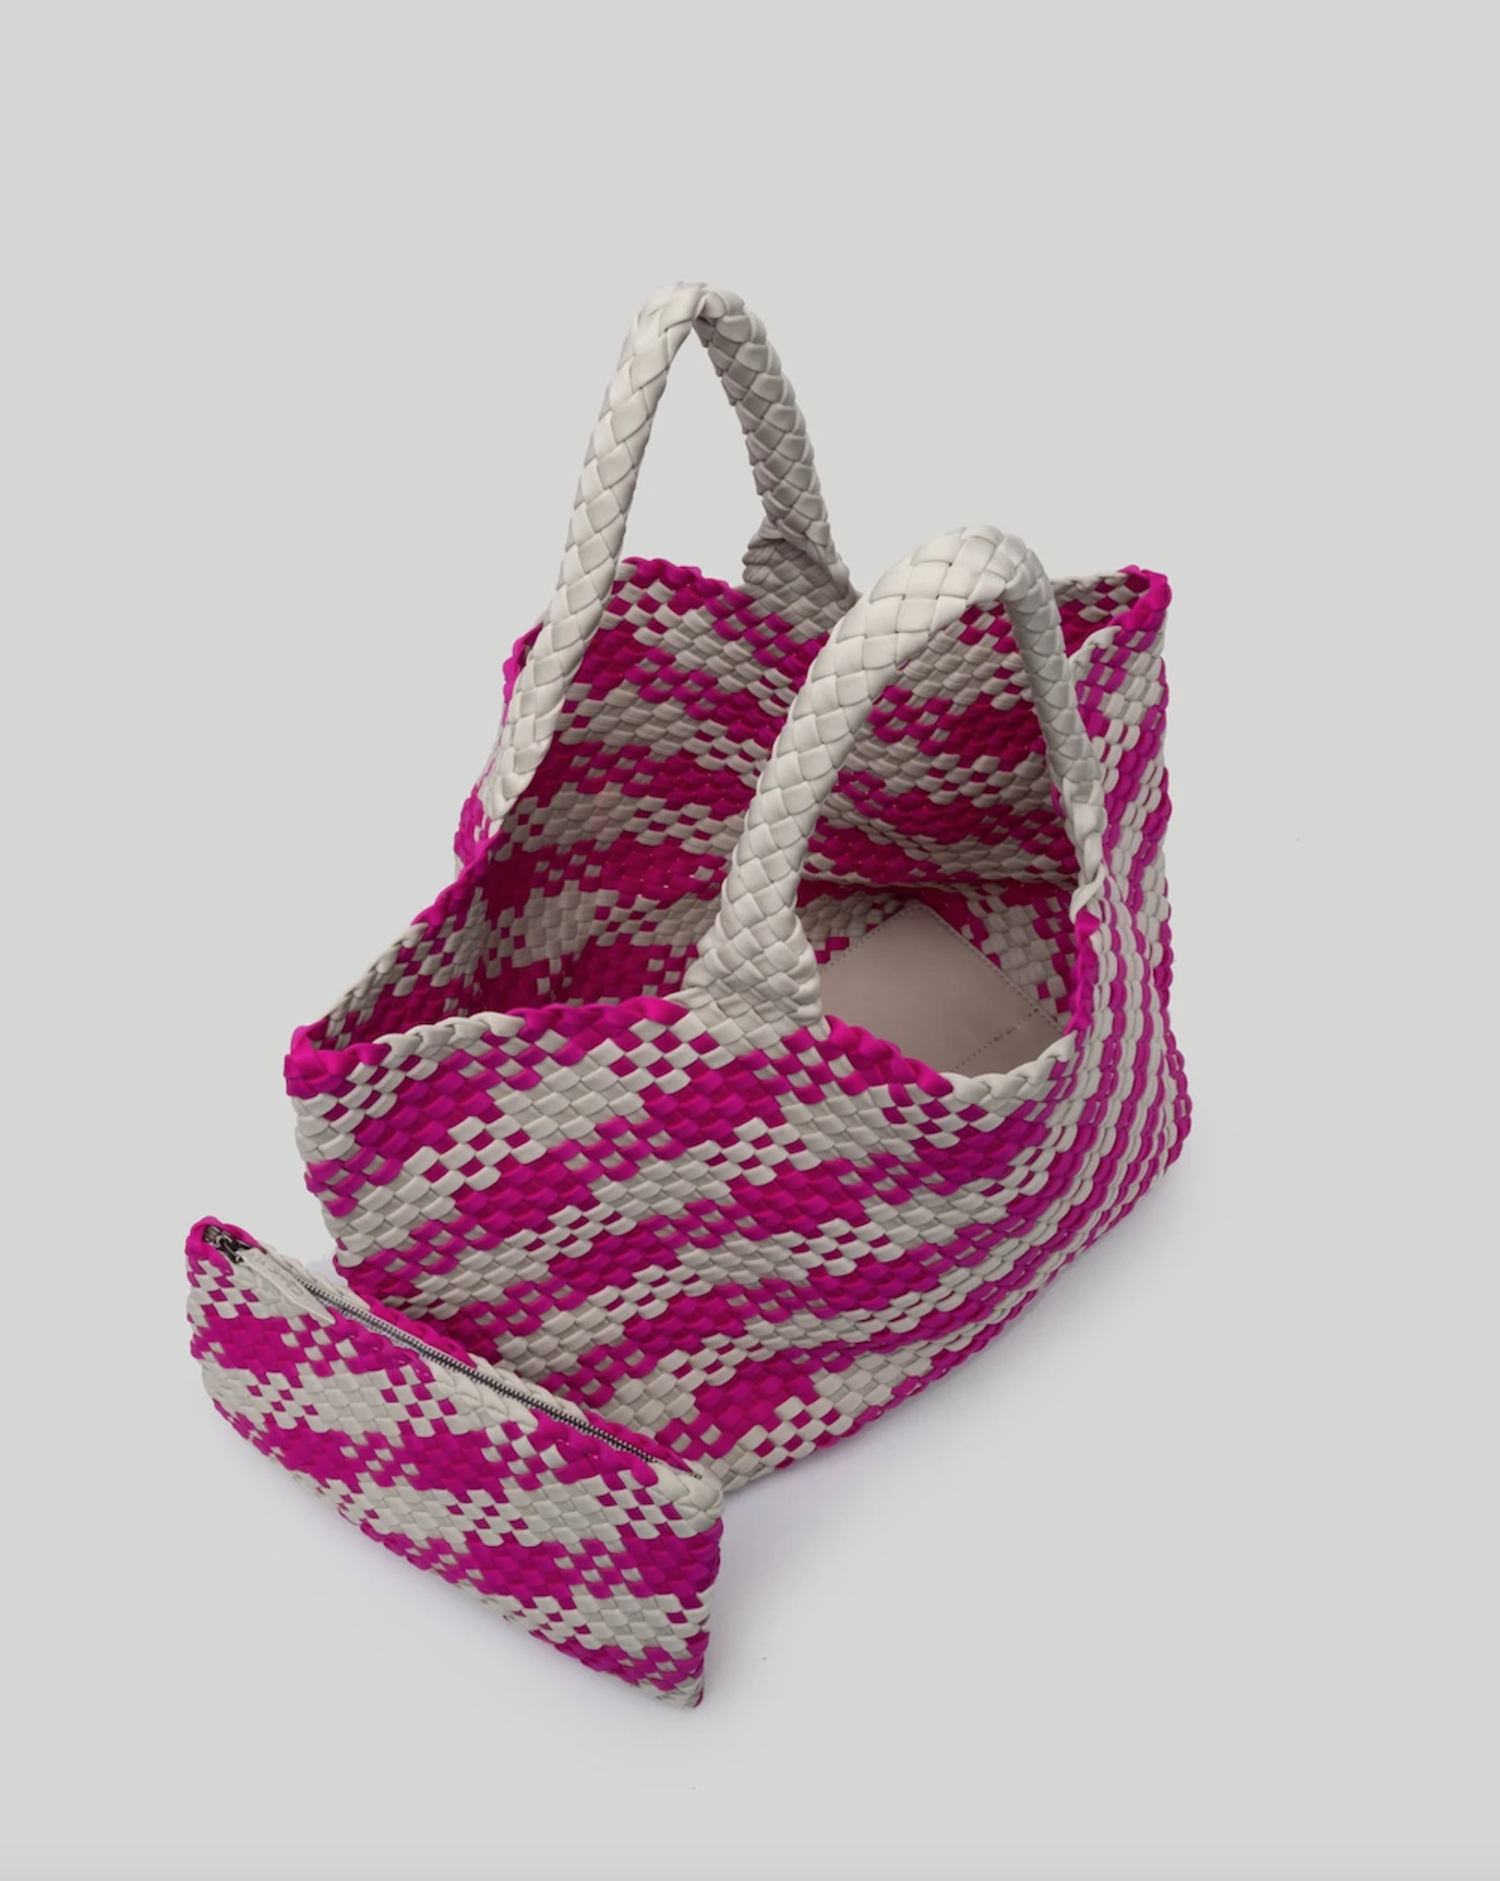 Things I'm loving lately: my NAGHEDI St Barths large tote in shell pin, tote